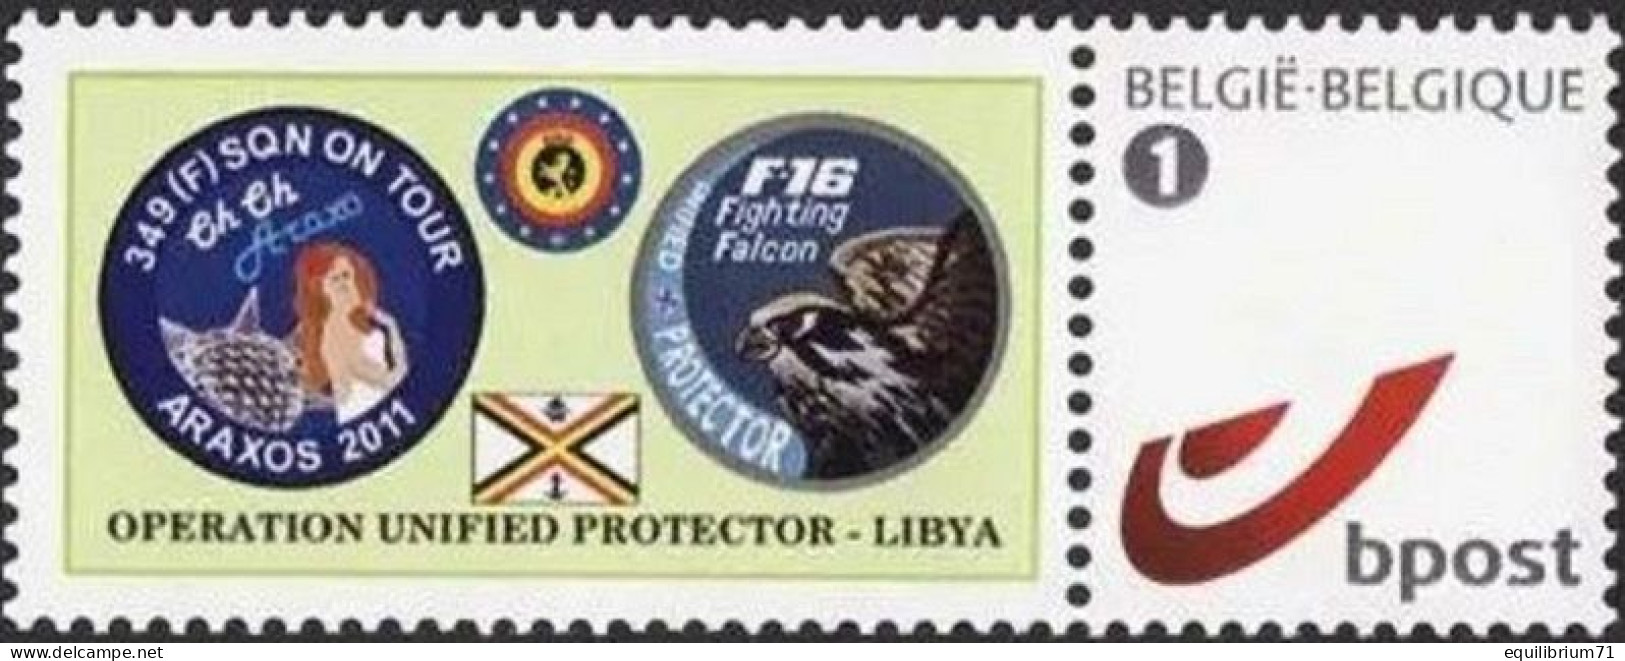 DUOSTAMP** / MYSTAMP** - Operation Unified Protector - NATO And Libya - Postfris